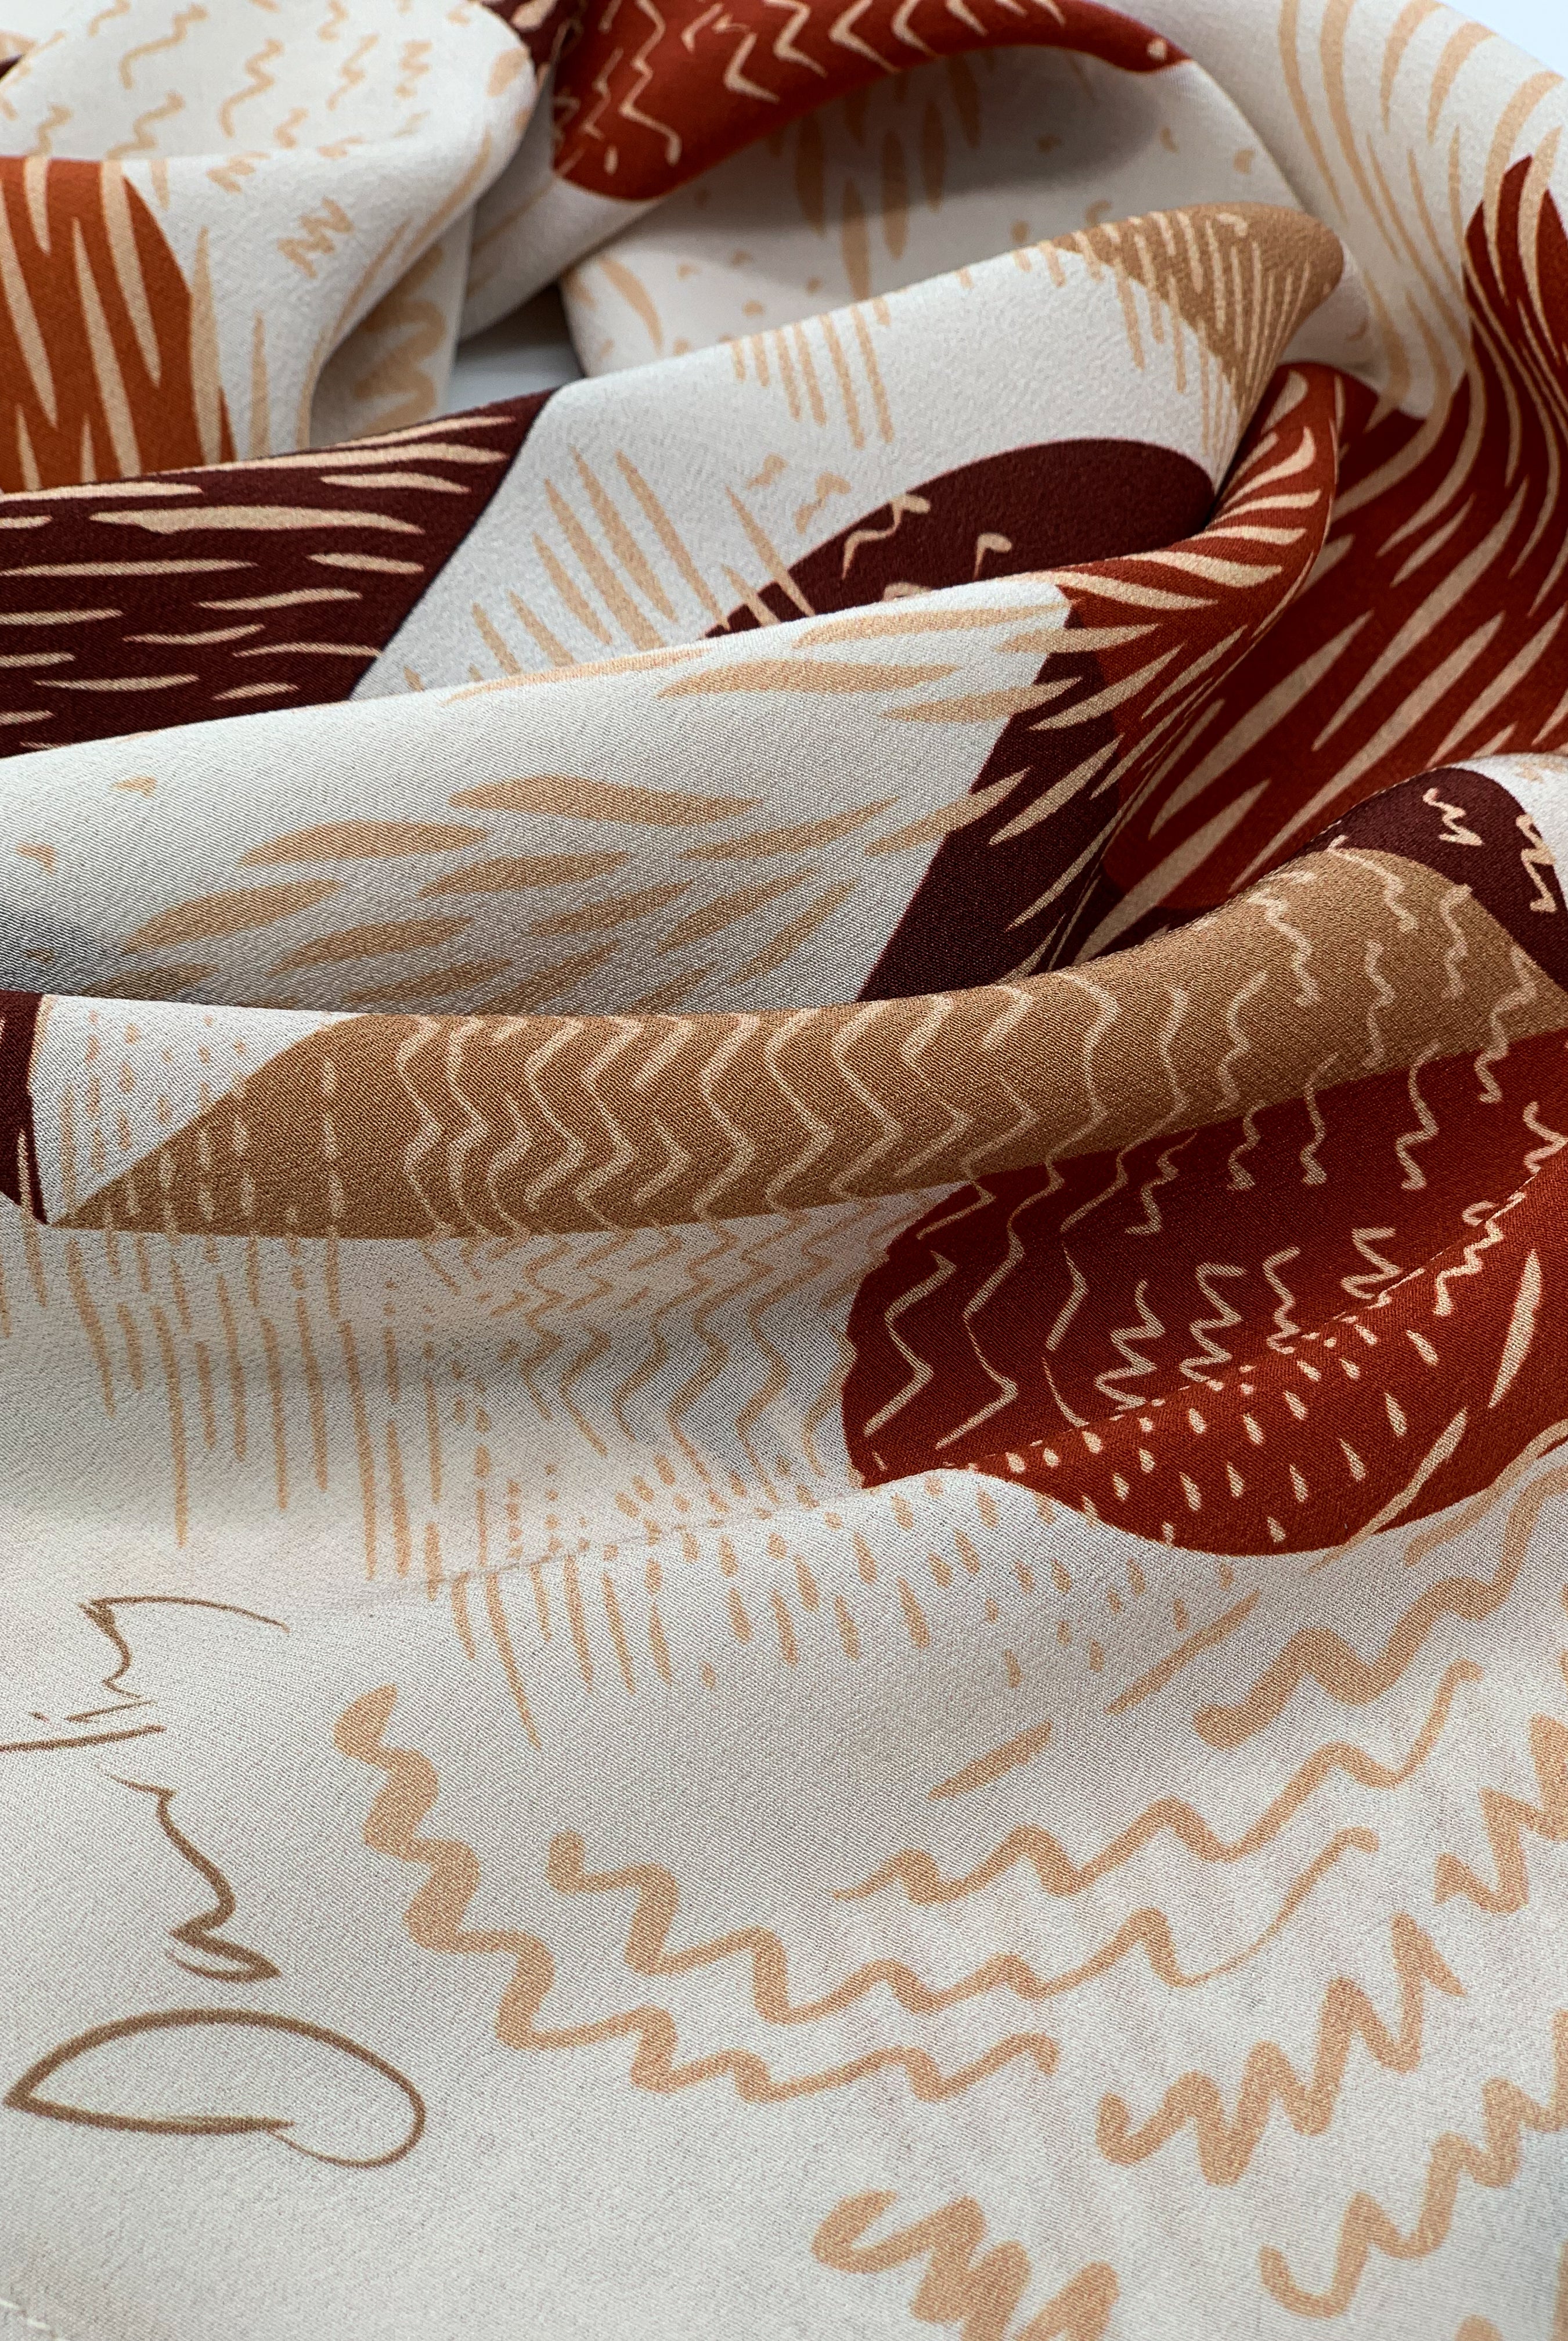 A close up of a silk printed scarf in earthy tones